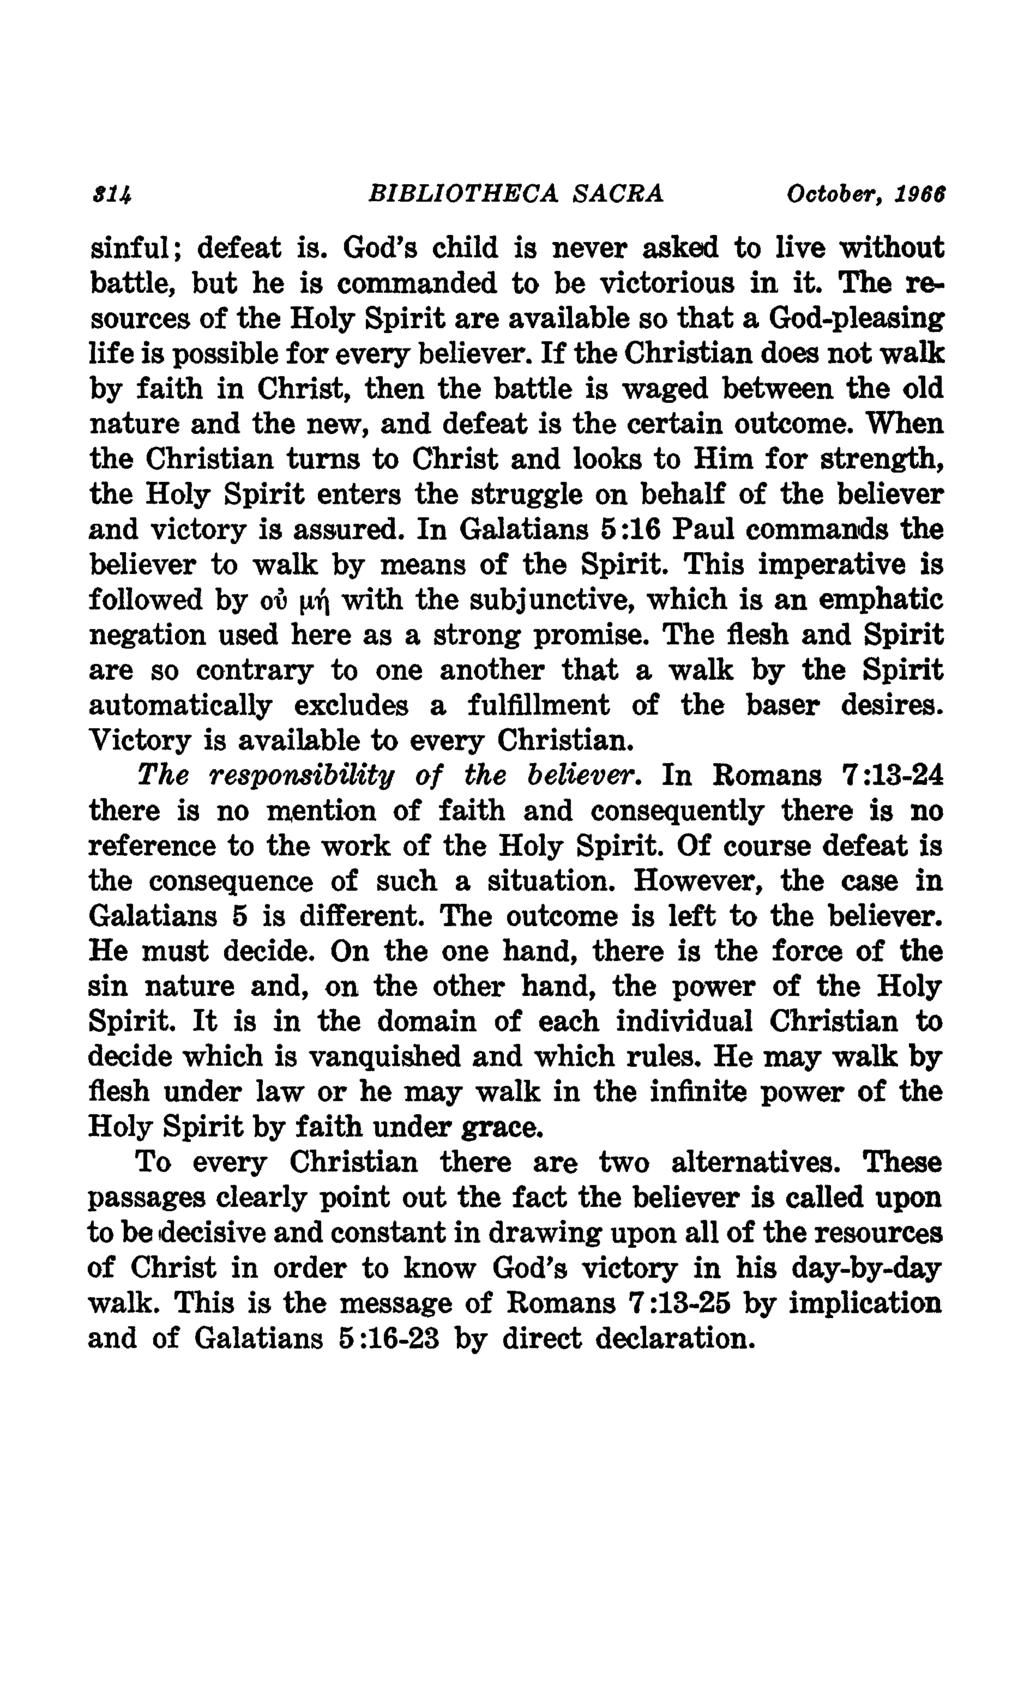 BIBLIOTHECA SACRA October, 1966 su sinful; defeat is. God's child is never asked to live without battle, but he is commanded to be victorious in it.